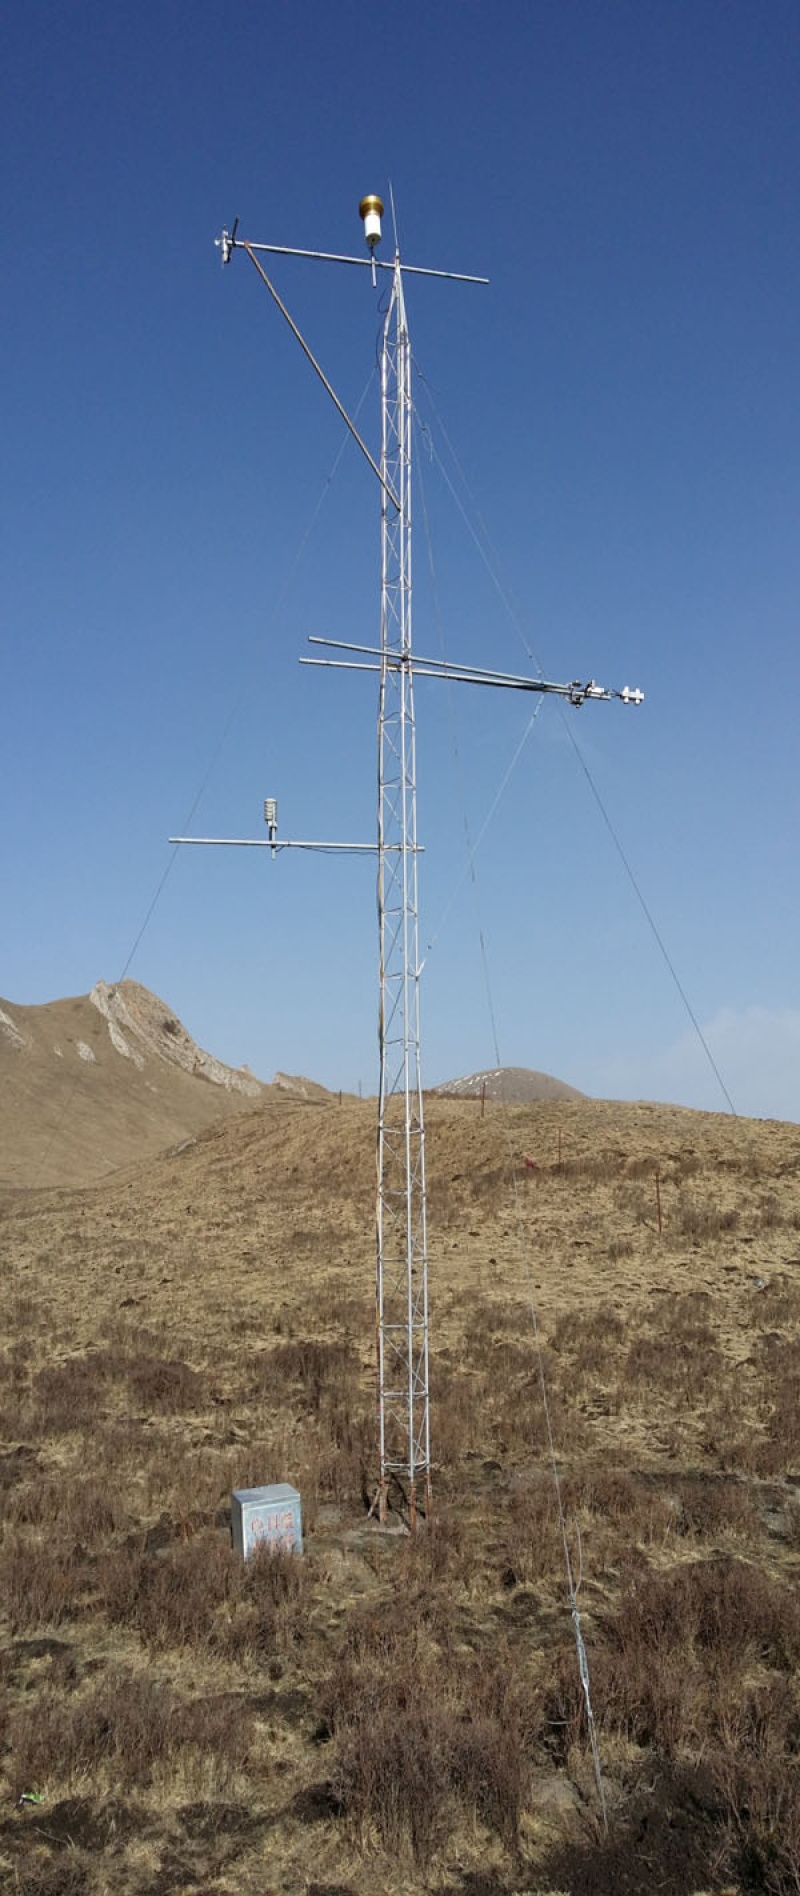 HiWATER: Dataset of hydrometeorological observation network (automatic weather station of A’rou sunny slope station, 2015)